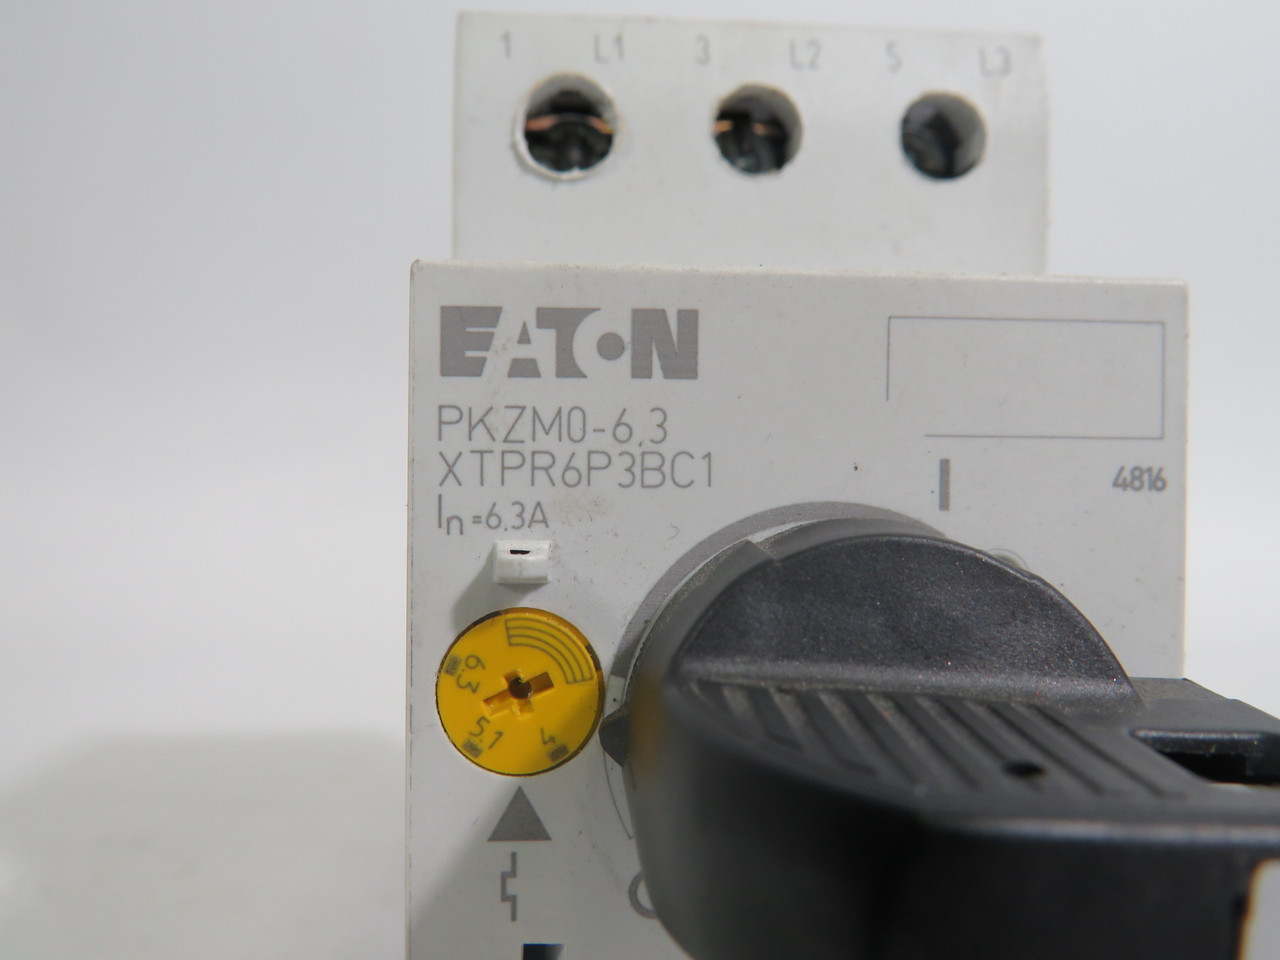 Eaton Electric PKZM0-6.3 Motor Protector Overload Relay 690V 4-6.3A USED